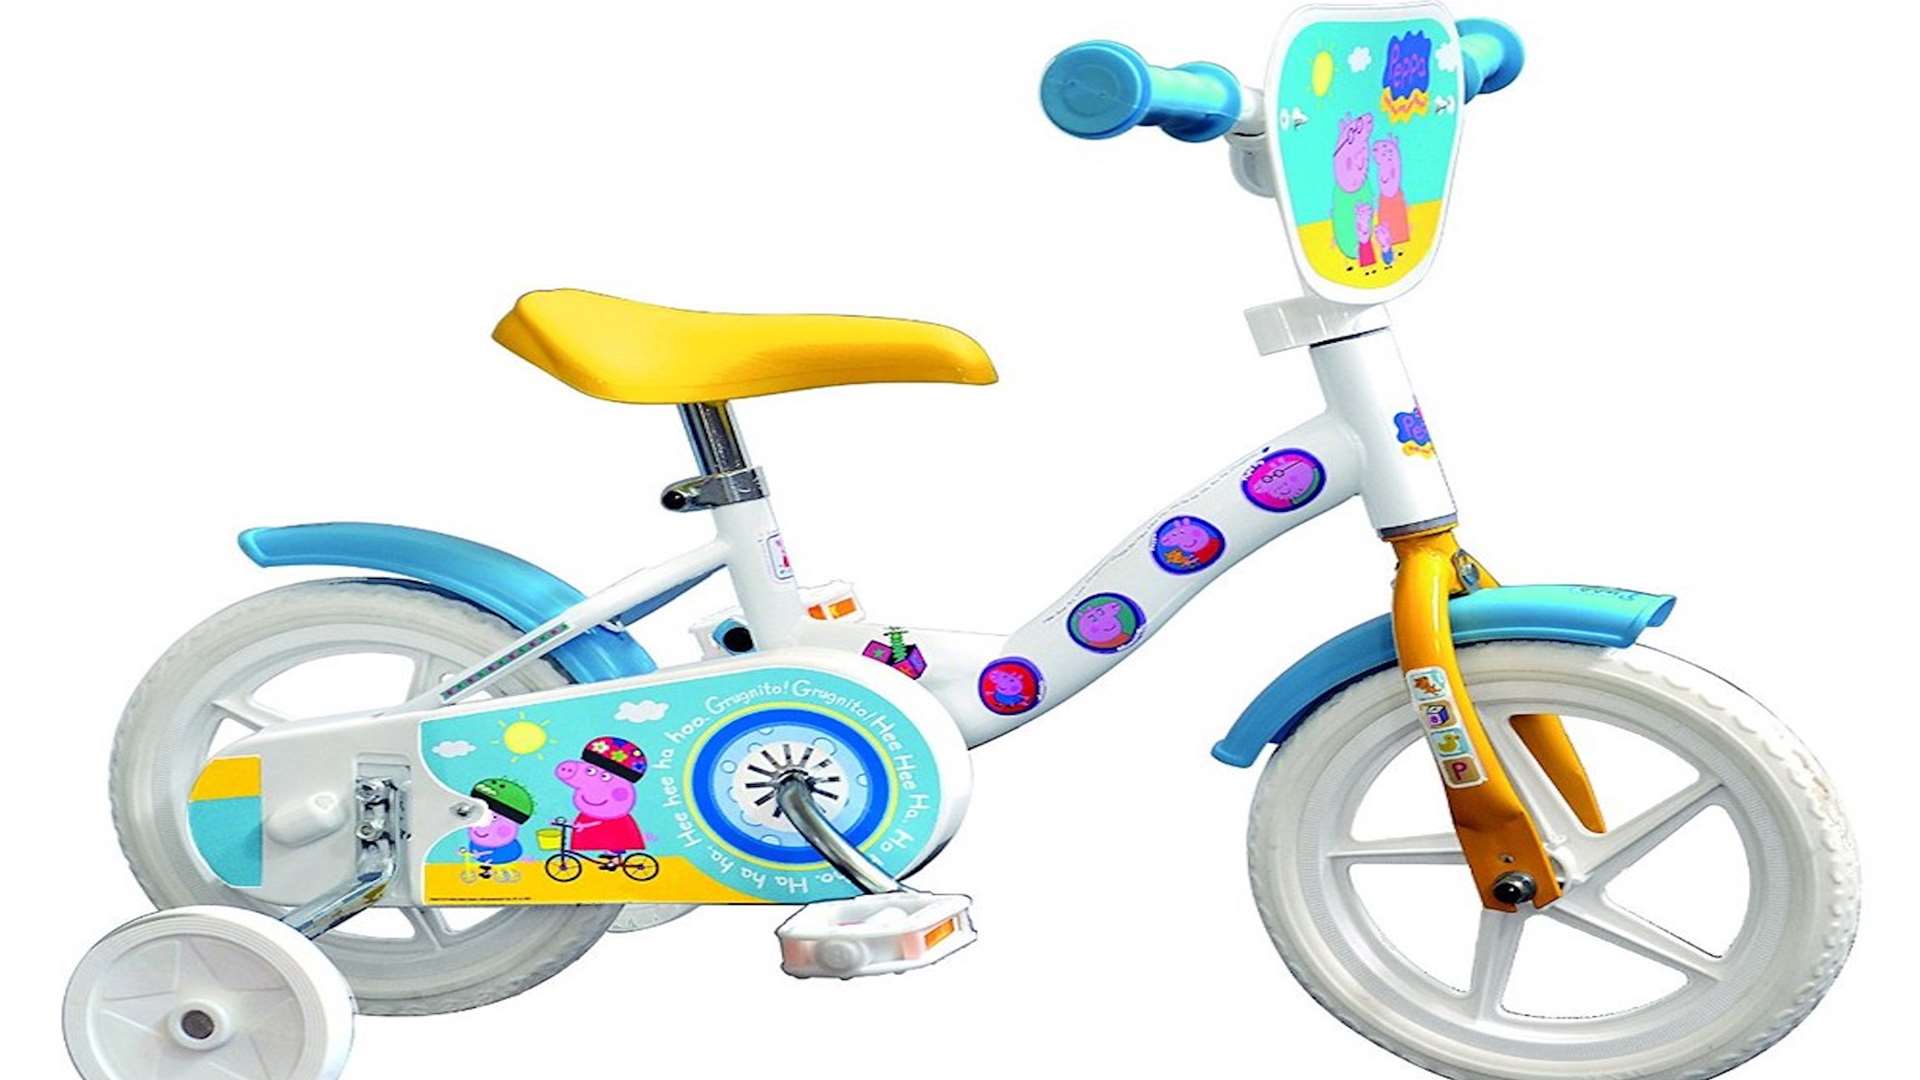 #5 This Peppa Pig bike has 10-inch alloy wheels, double brakes and stabilisers. Suitable for three to five years, it costs £59.99 at TJ Hughes and would make the perfect first bike for any youngster.